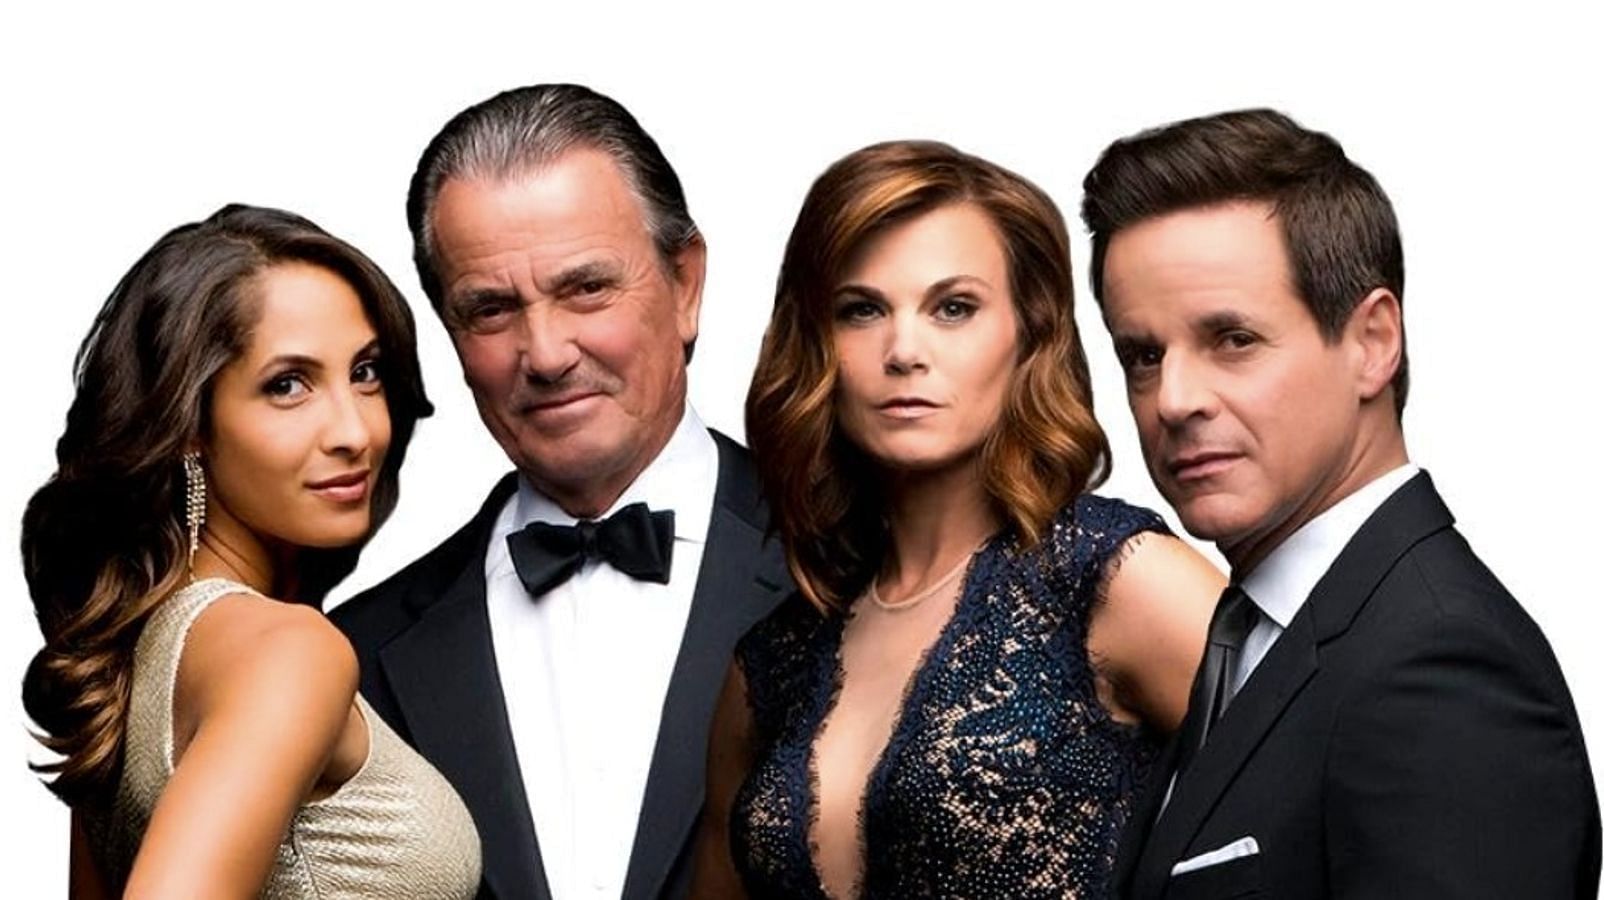 Eric Braeden, Christel Khalil, Christian Jules Le Blanc, and Gina Tognoni in The Young and the Restless (Image via IMDb)